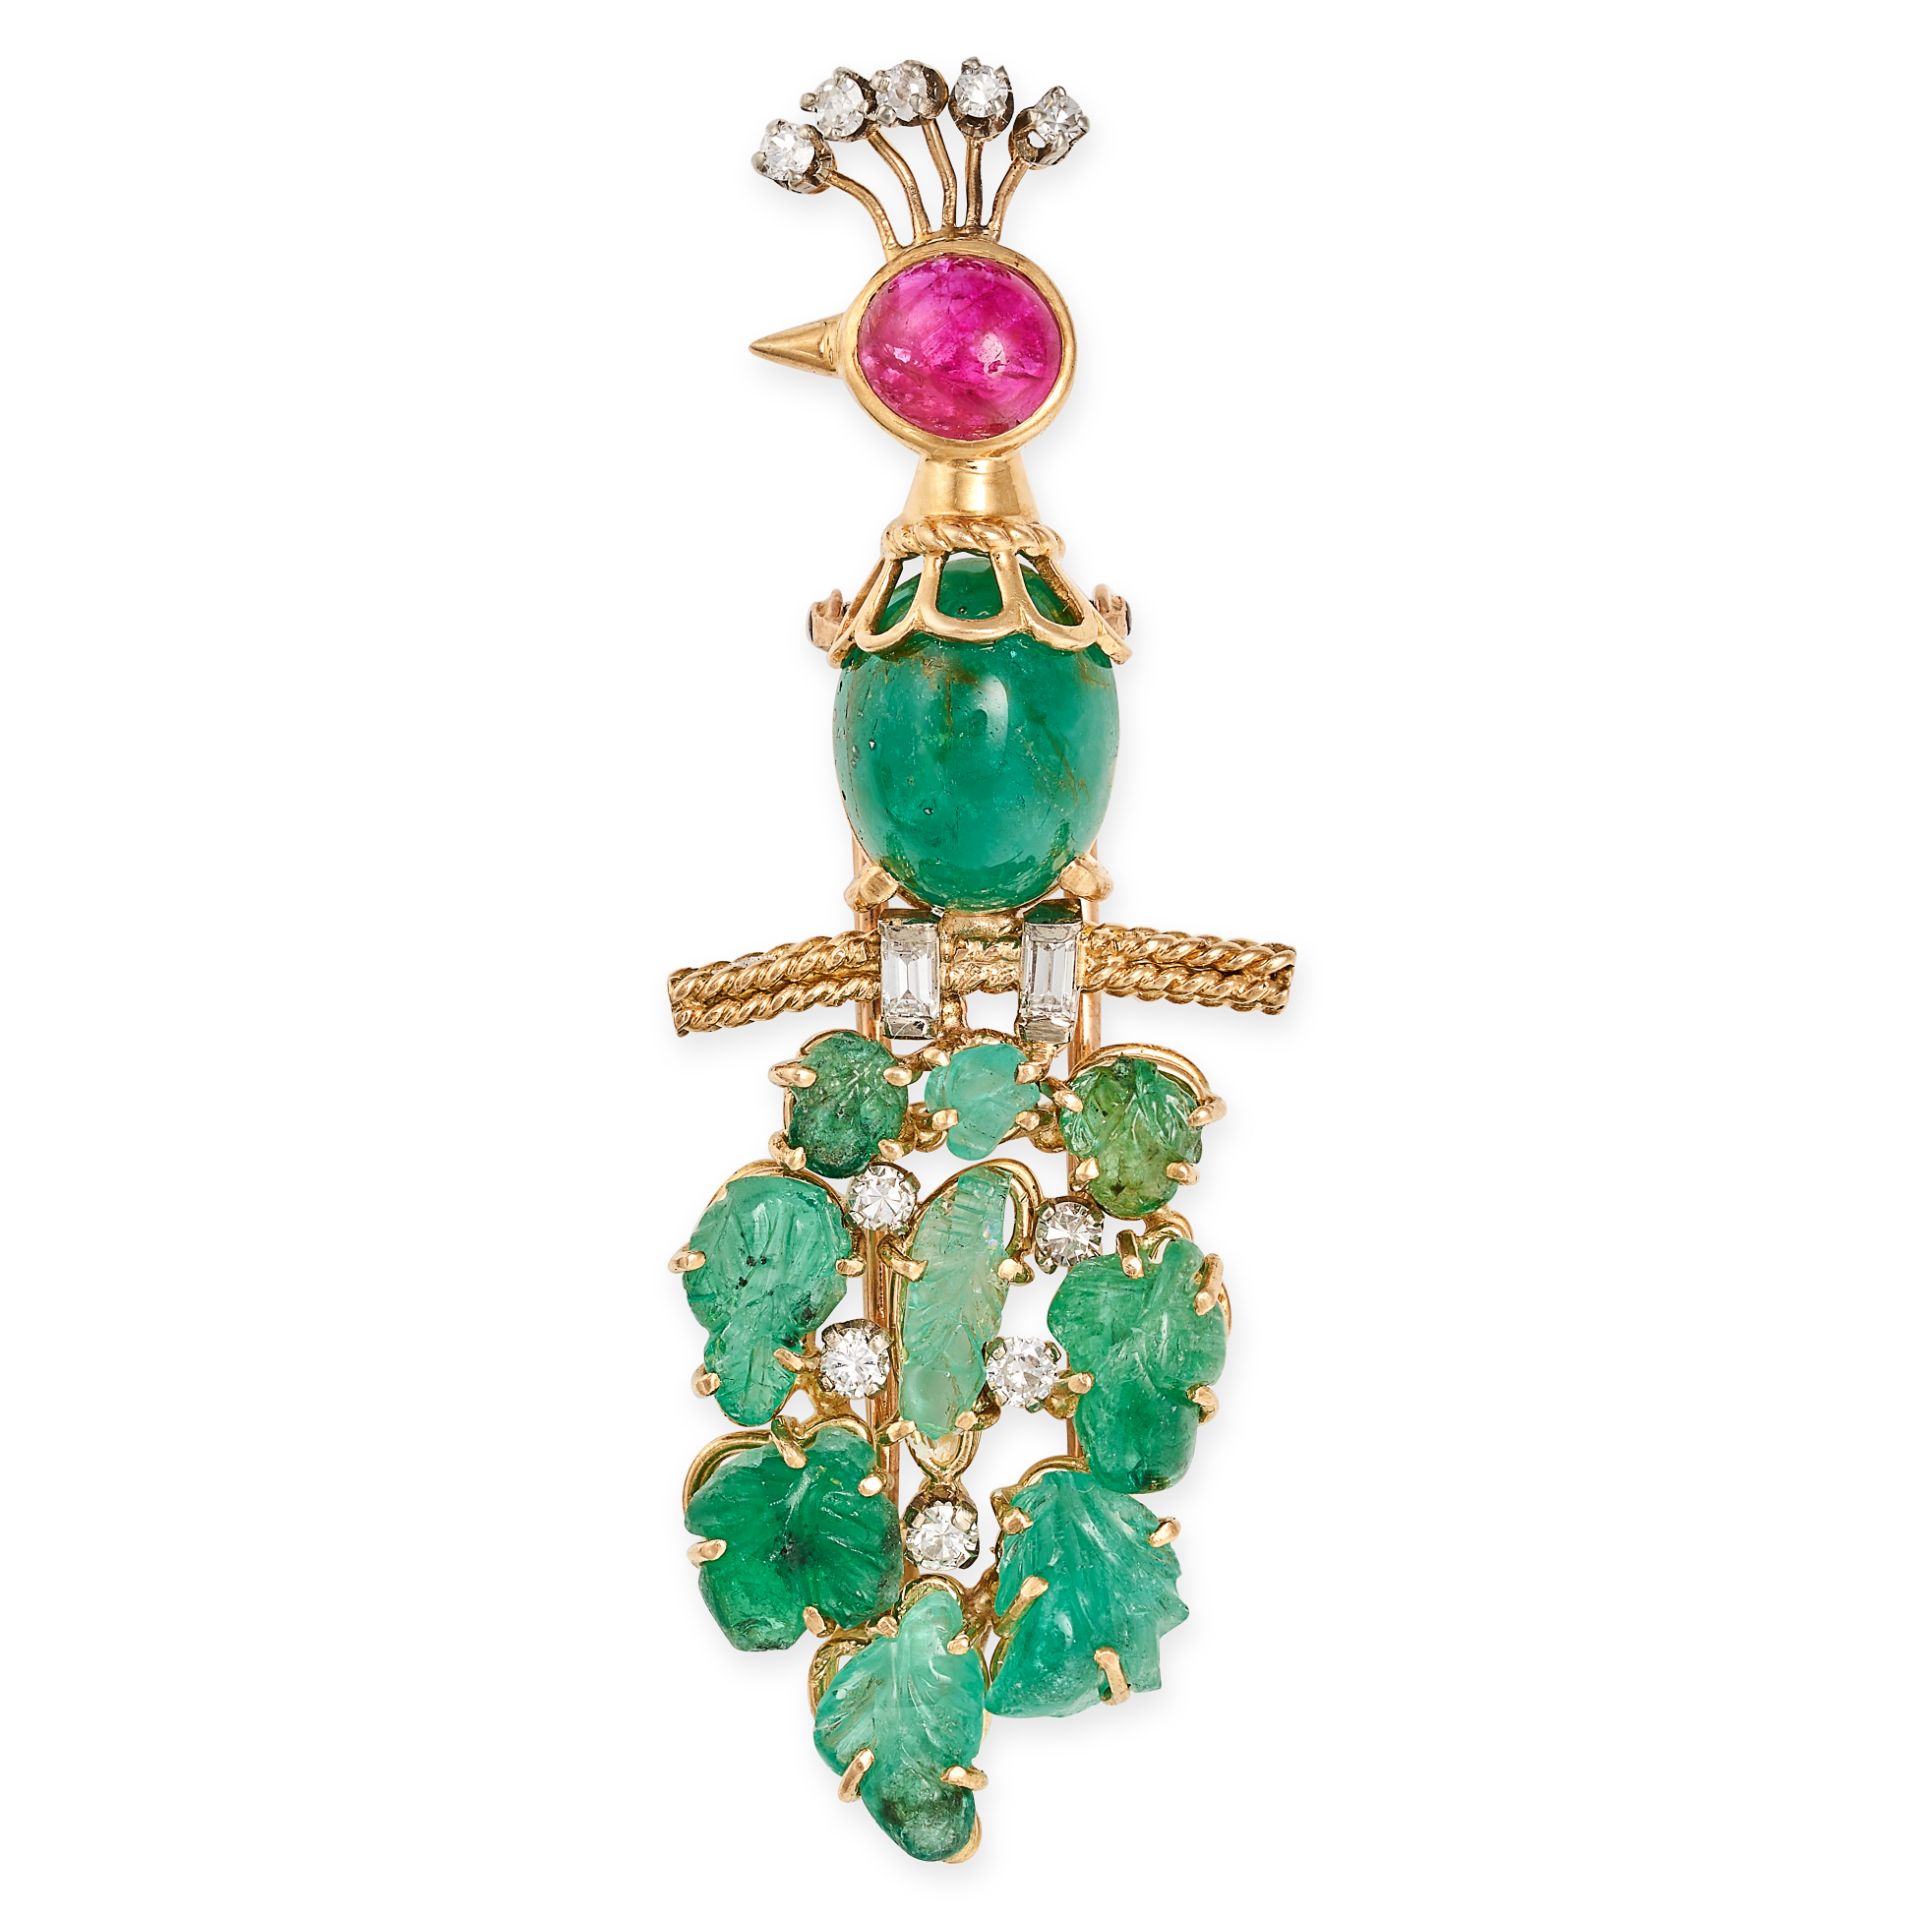 A TUTTI FRUTTI EMERALD, RUBY AND DIAMOND PEACOCK BROOCH in 18ct yellow gold, designed as a peacoc...